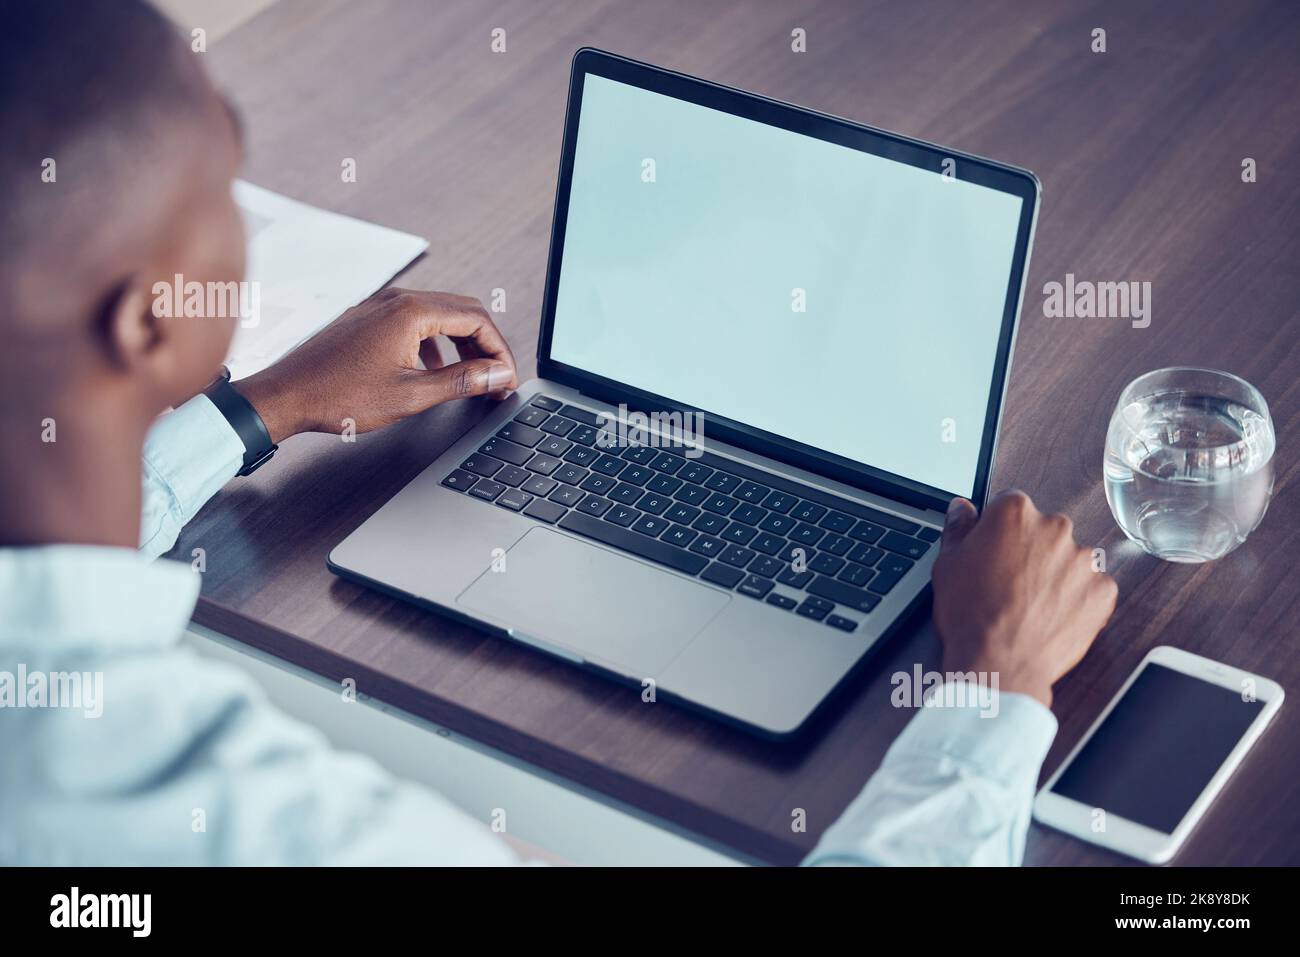 Mockup screen, advertising and businessman on a laptop for business, networking and communication in an office at work. Computer of corporate worker Stock Photo